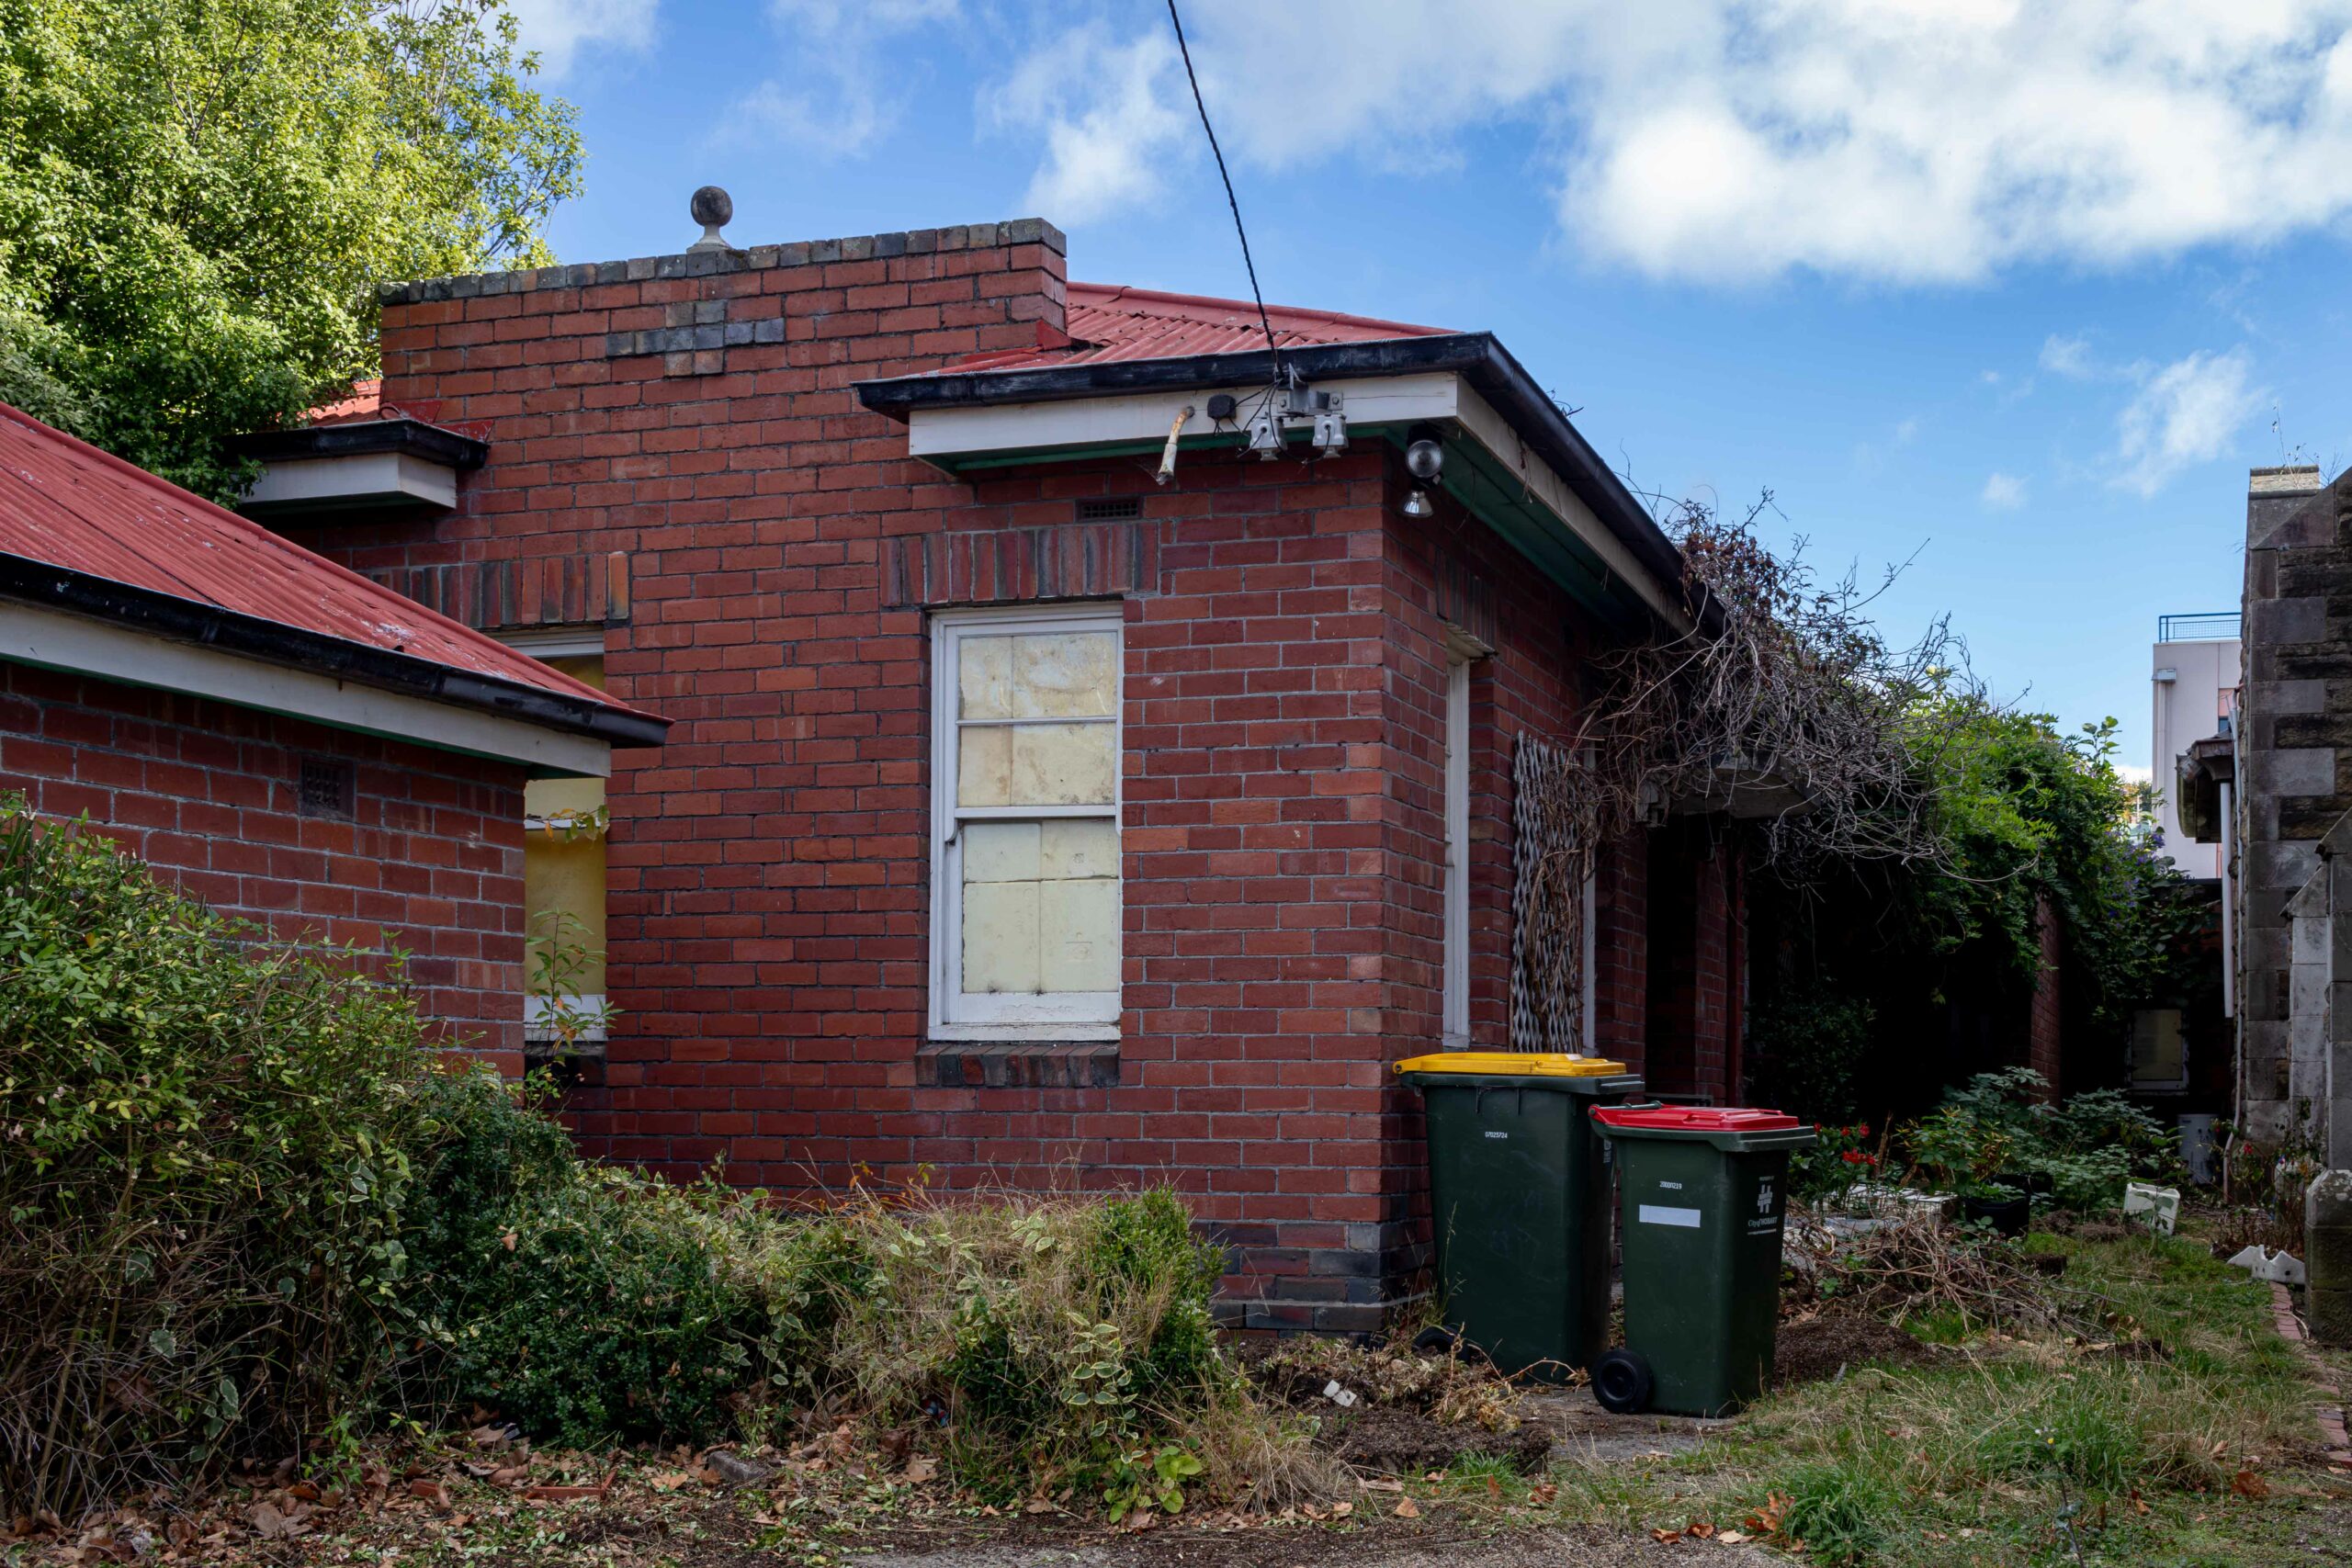 A single storey red brick house with two bins out side and a lot of green waste along the side. The windows are papered over